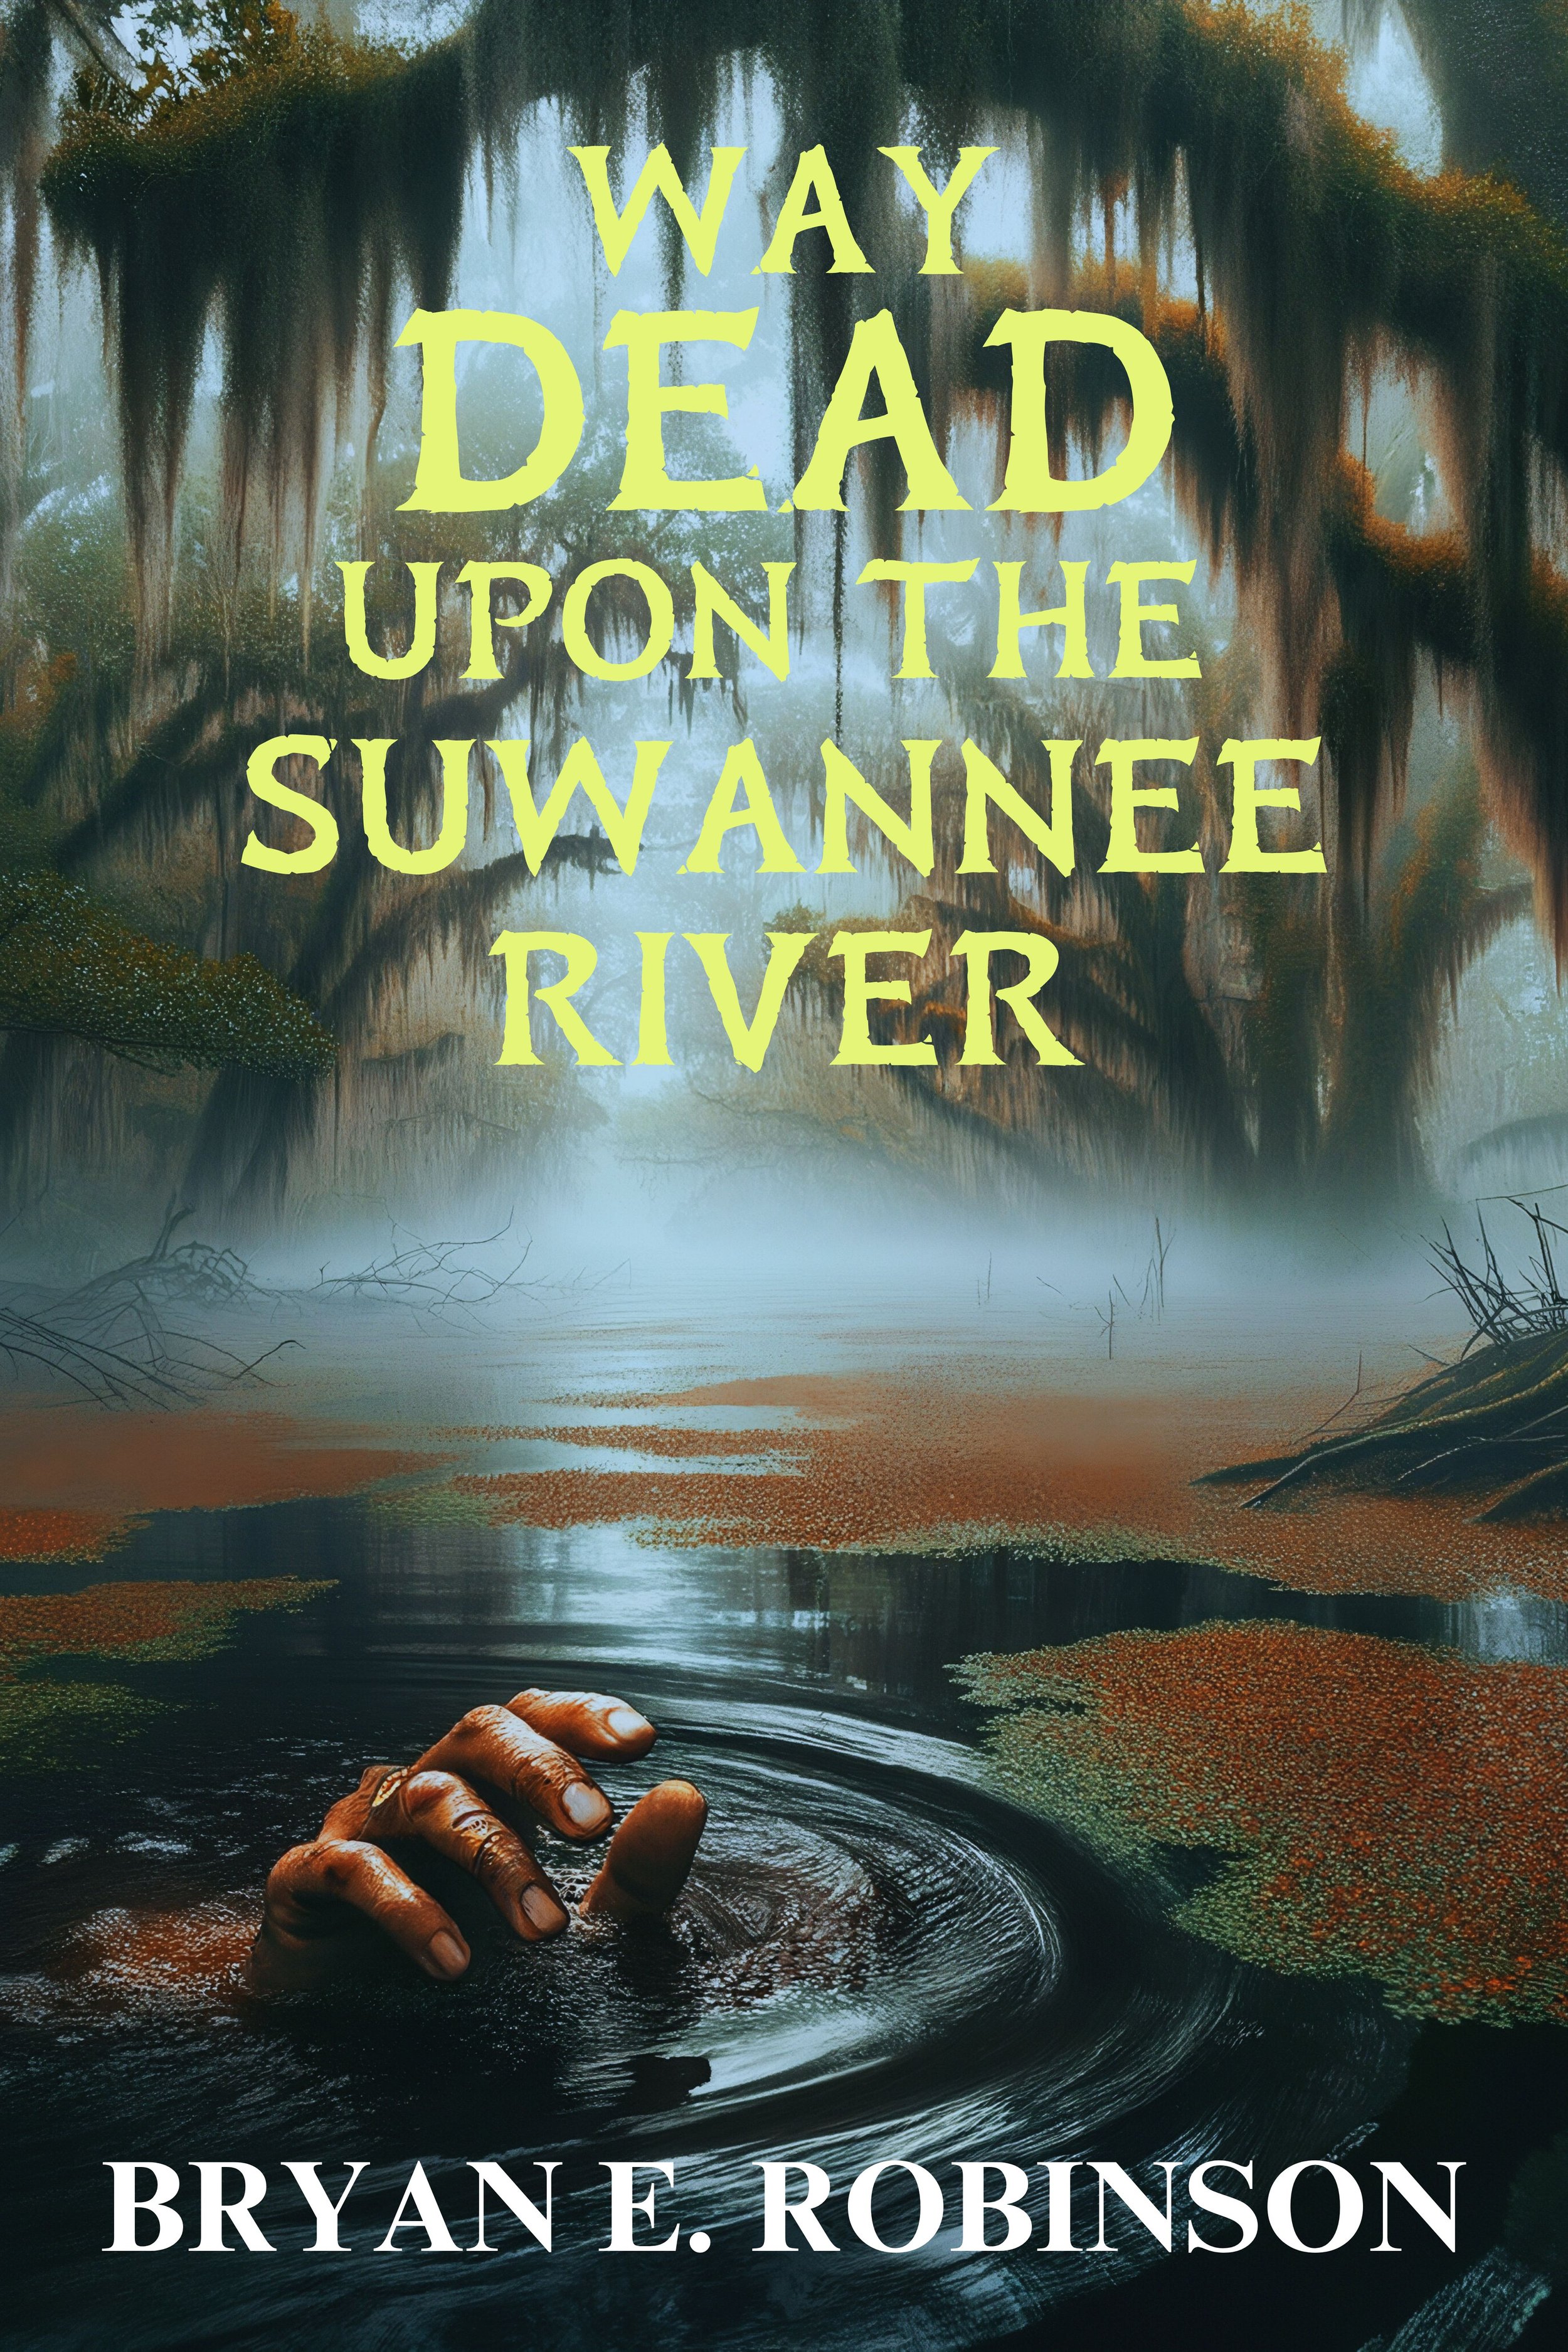 WAY DEAD UPON THE SUWANNEE RIVER cover FINAL hi res.jpg